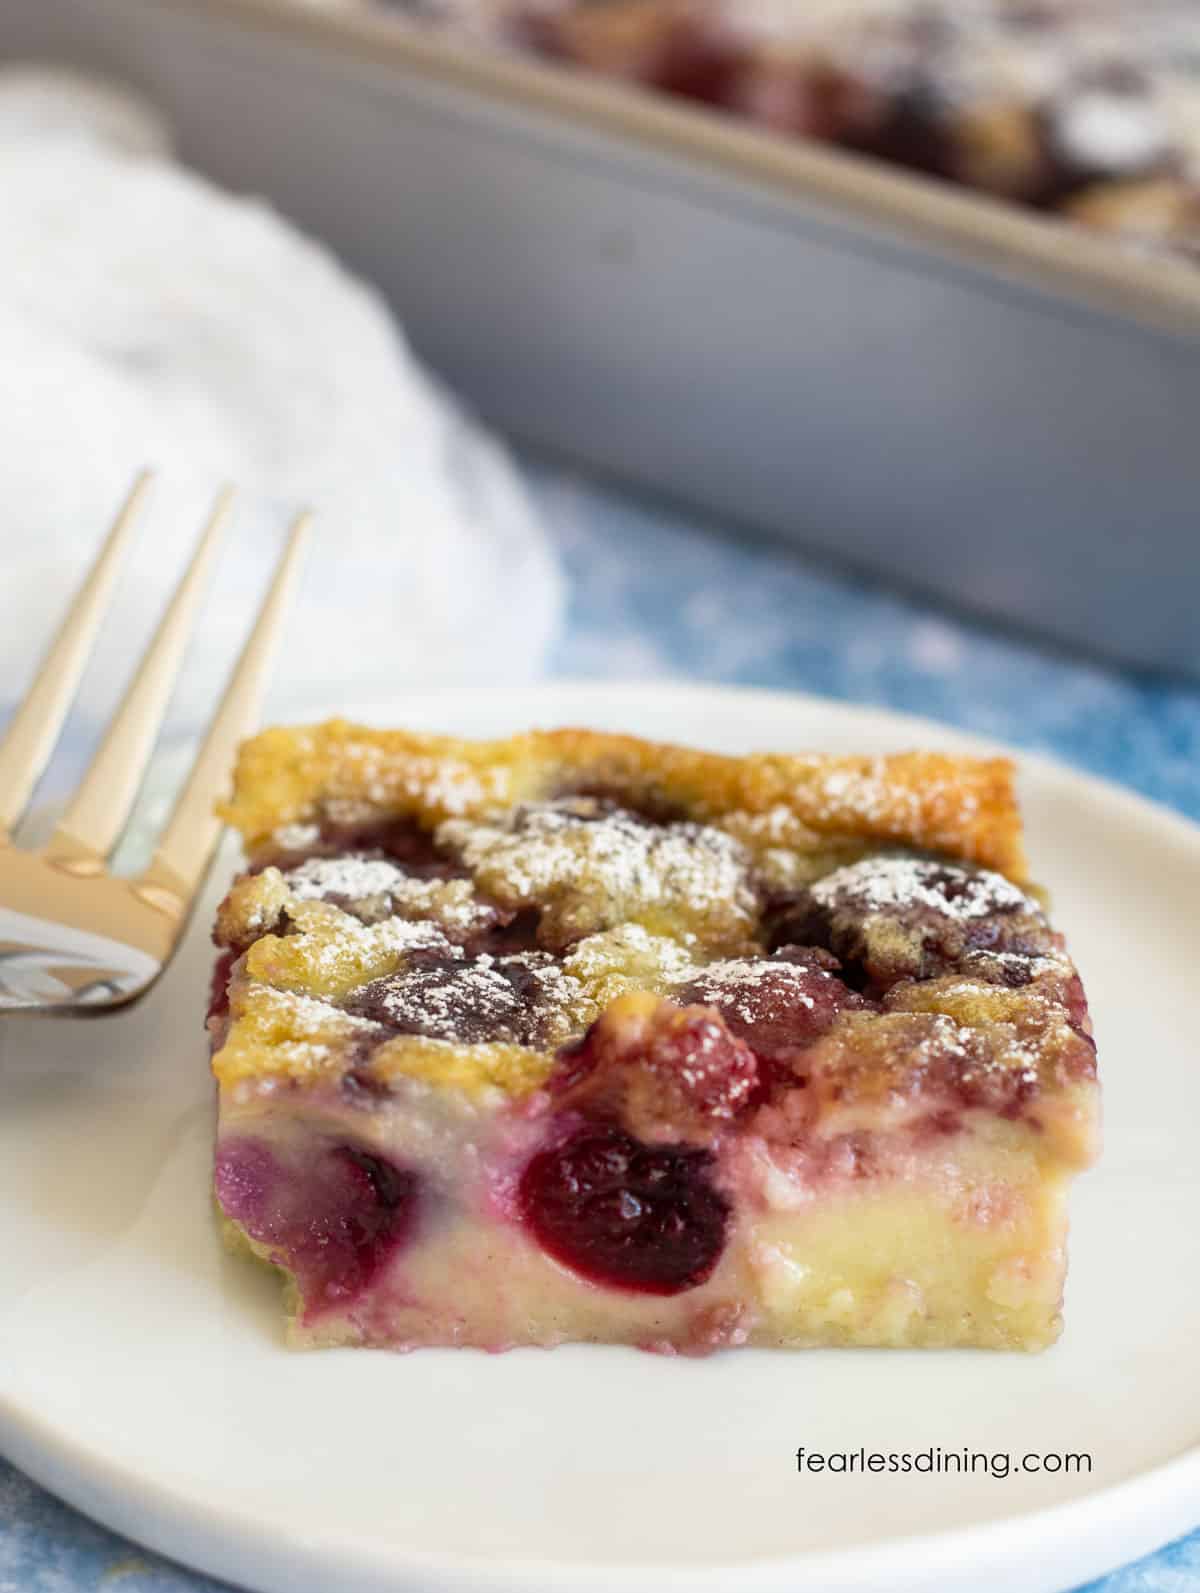 A slice of cherry clafoutis cake on a plate.